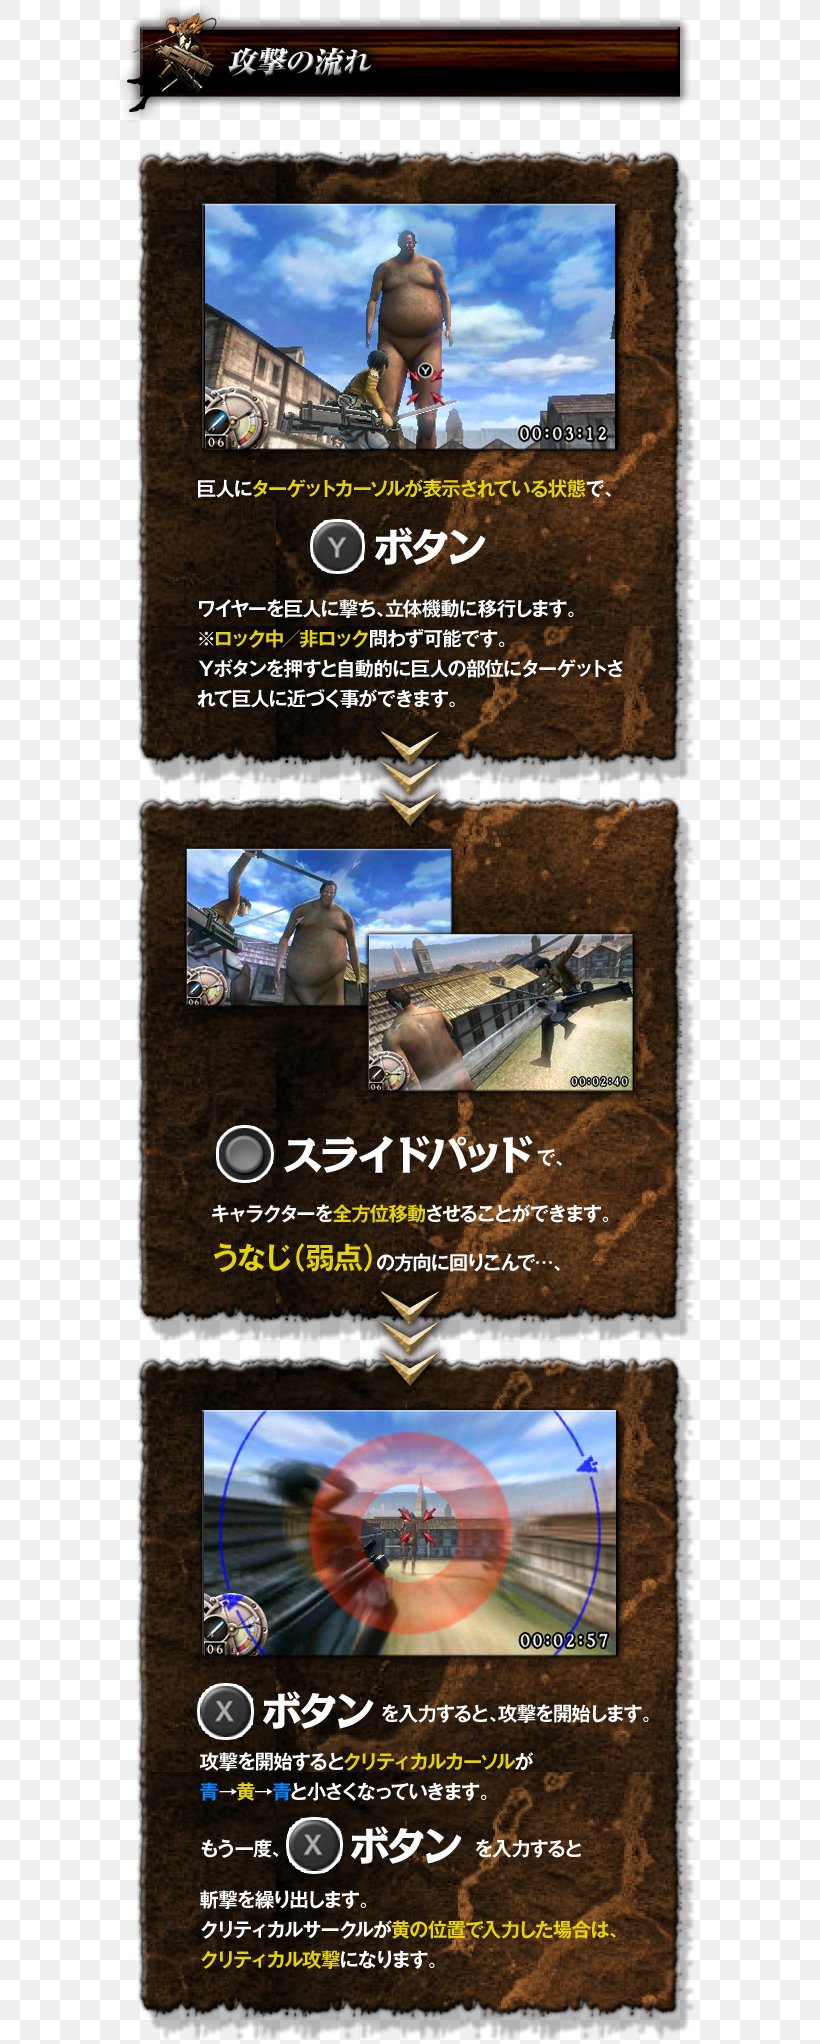 Attack On Titan: Humanity In Chains Nintendo 3DS System Online Game, PNG, 640x2044px, Attack On Titan Humanity In Chains, Advertising, Attack On Titan, Nintendo 3ds, Online Game Download Free